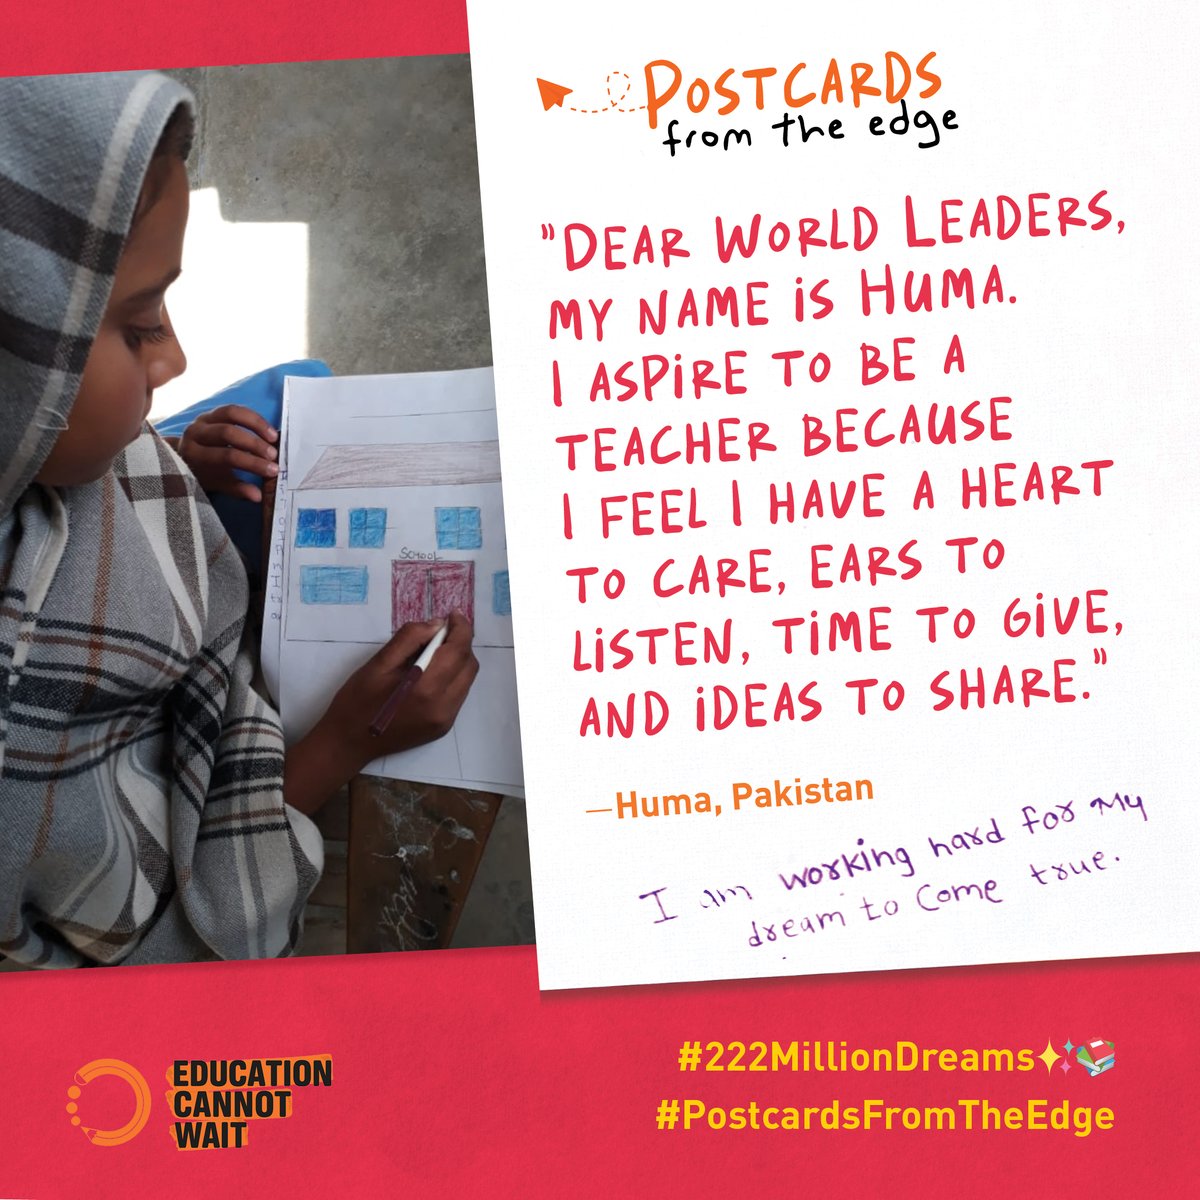 “I aspire to be a #teacher because I feel I have a heart to care, ears to listen, time to give & ideas to share” ~Huma, #Pakistan🇵🇰.

Read her #PostcardsFromTheEdge to hear how @EduCannotWait+@UNICEF_Pakistan is making #222MillionDreams✨📚 come true.

📨bit.ly/3R7l4UE